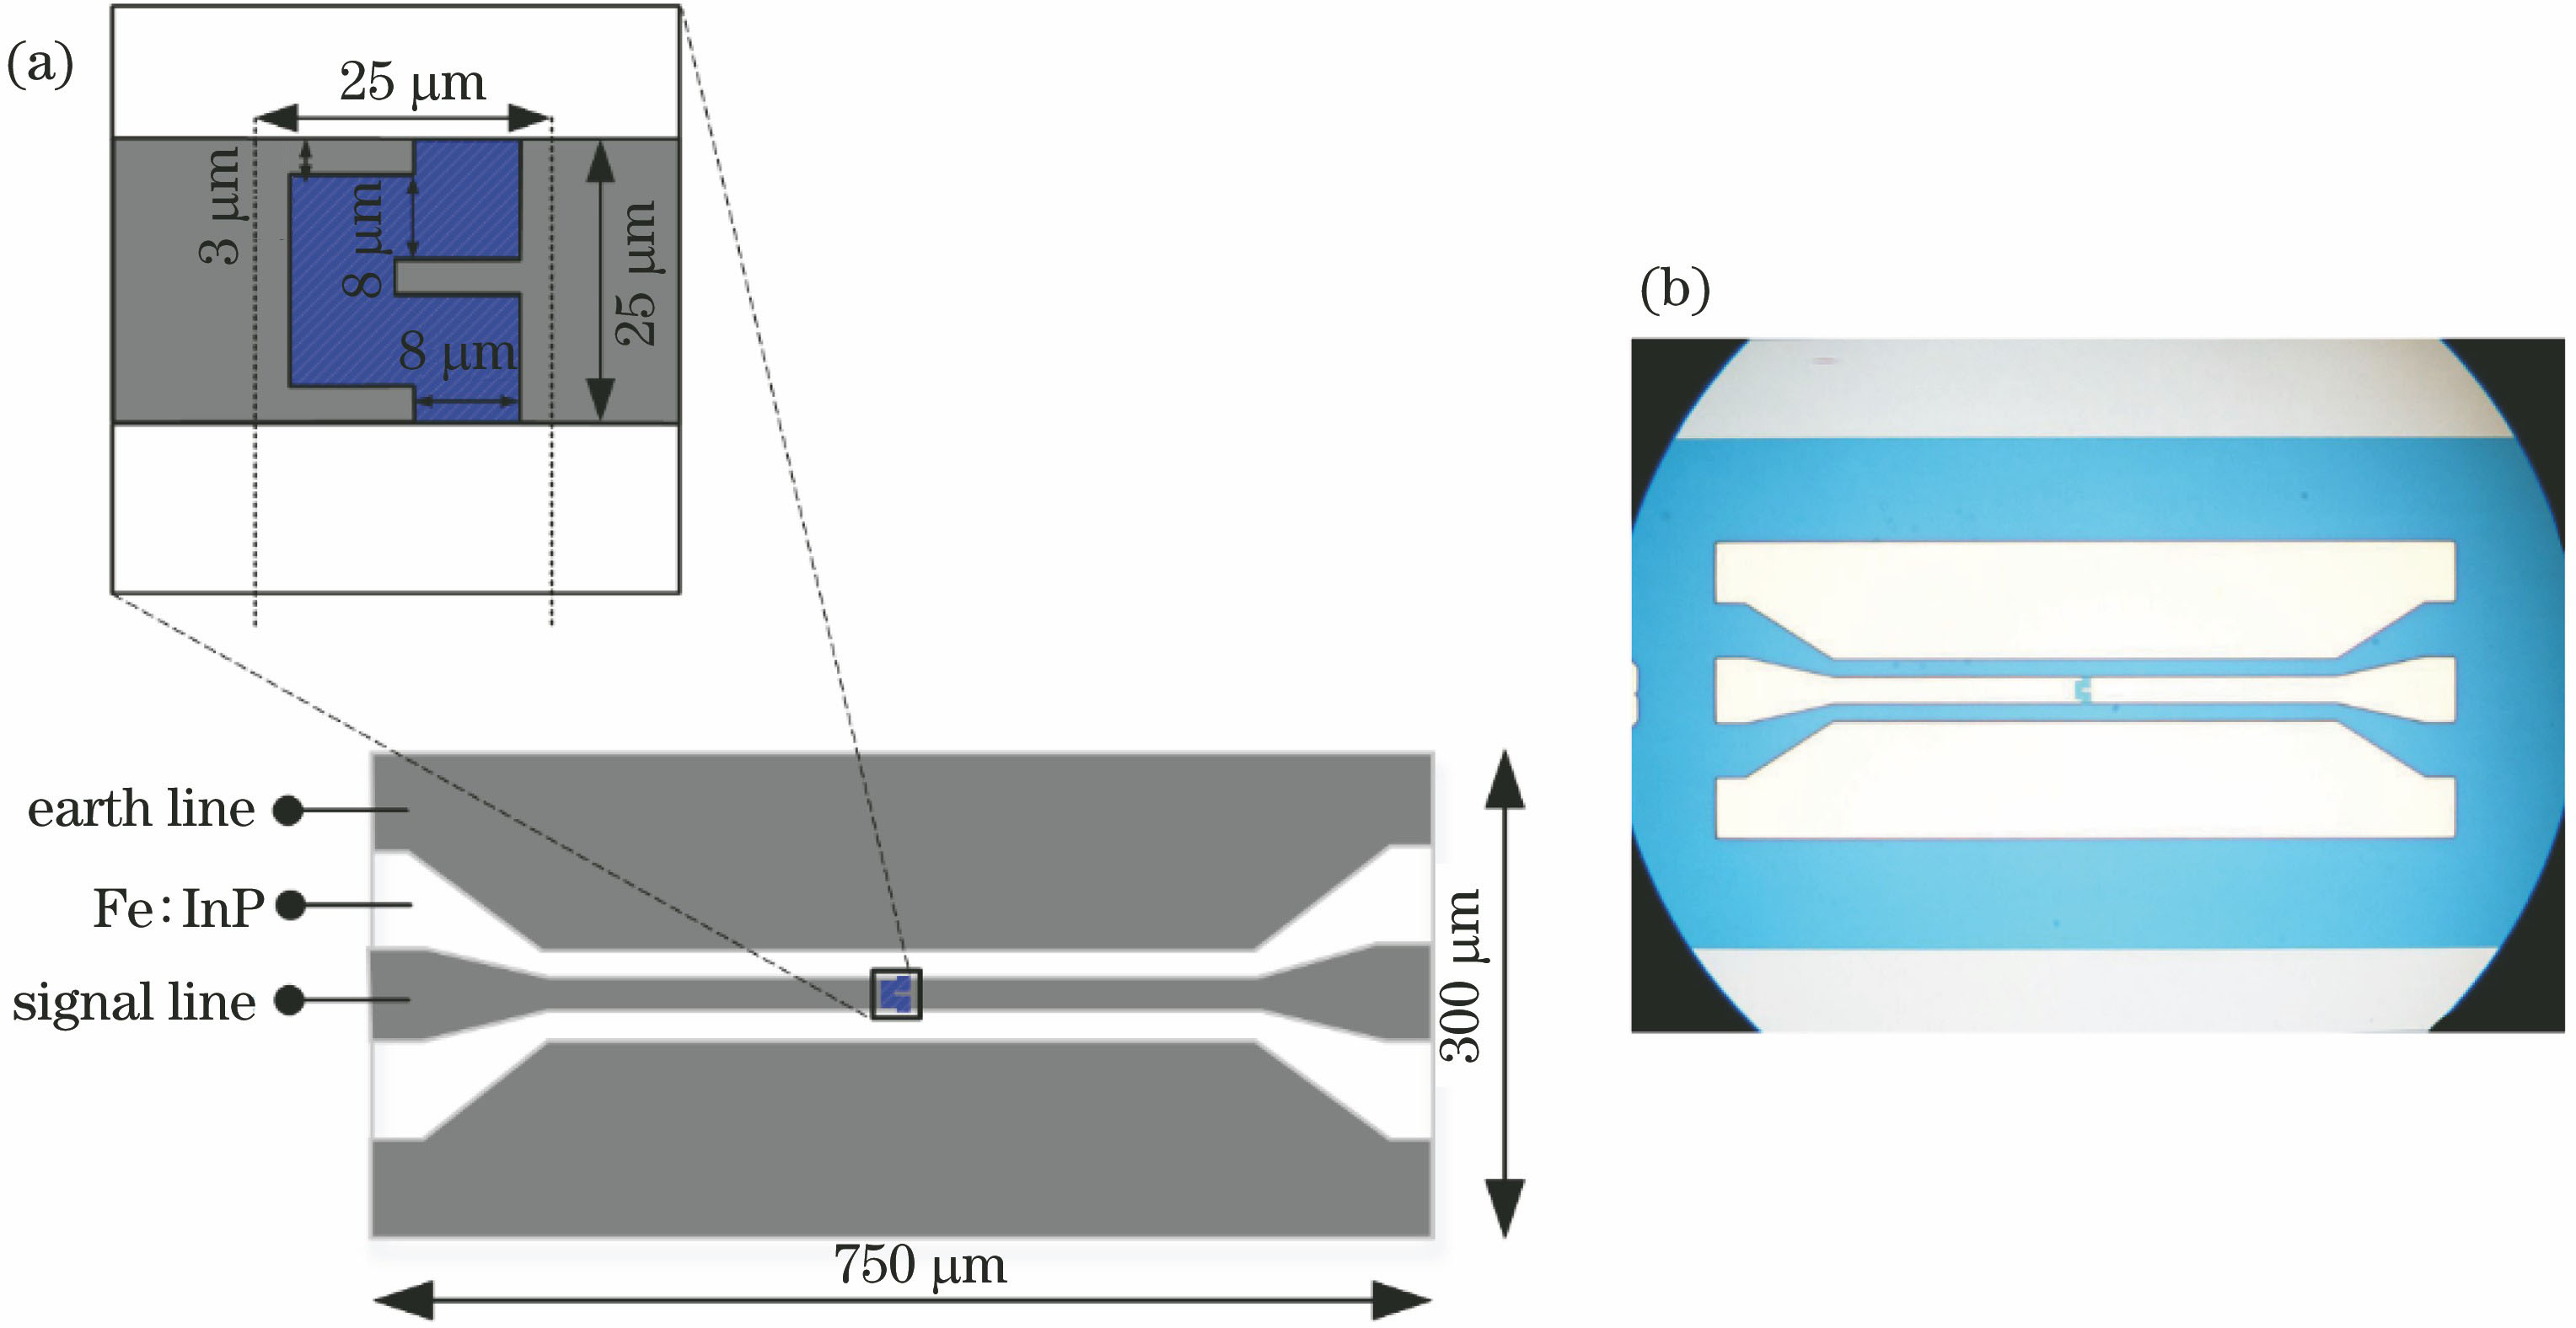 Structure diagram of photoconductive switch. (a) Schematic diagram; (b) physical map